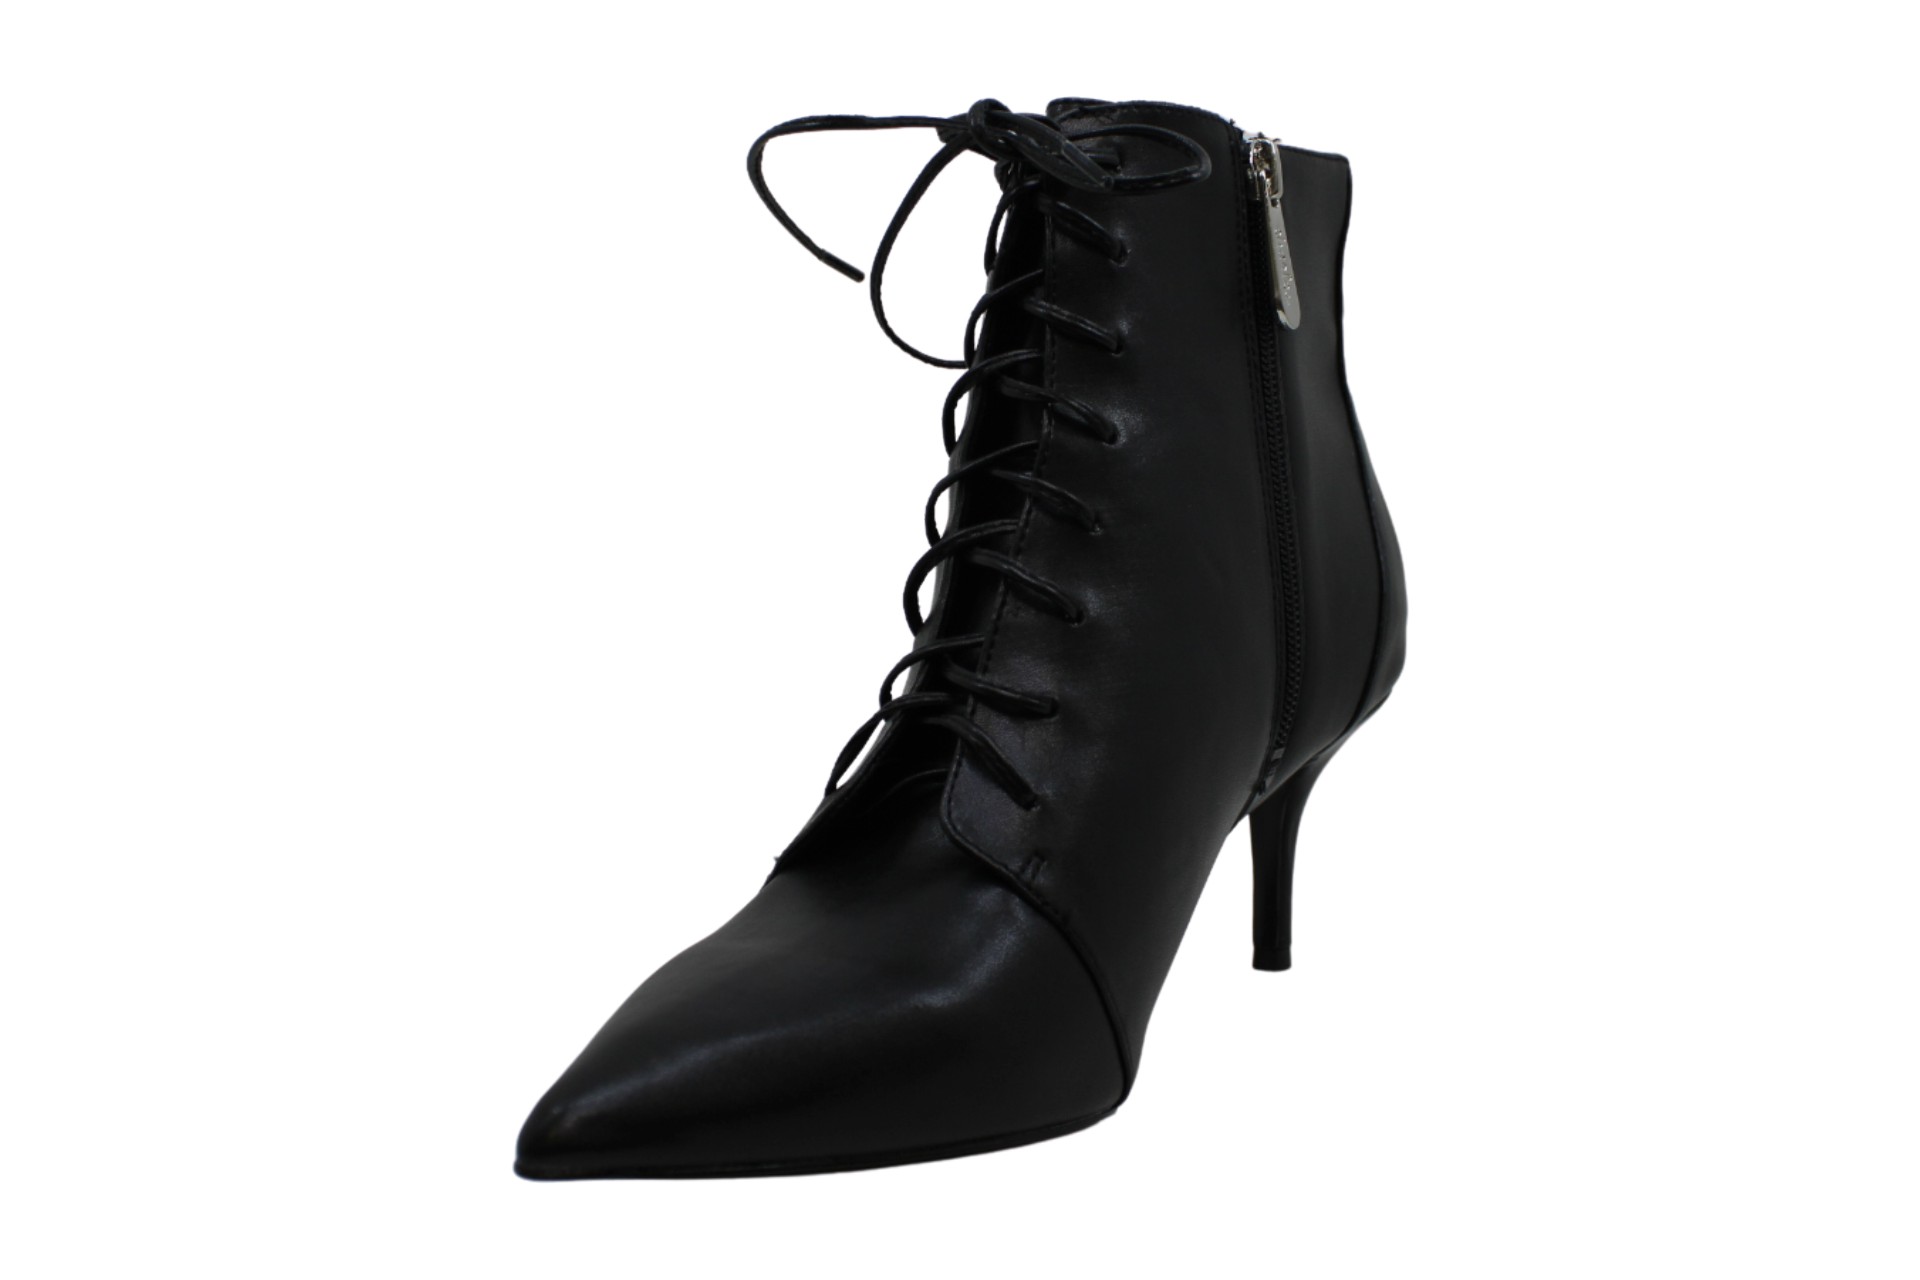 Charles by Charles David Womens Boots in Black Color, Size 9 BTY | eBay